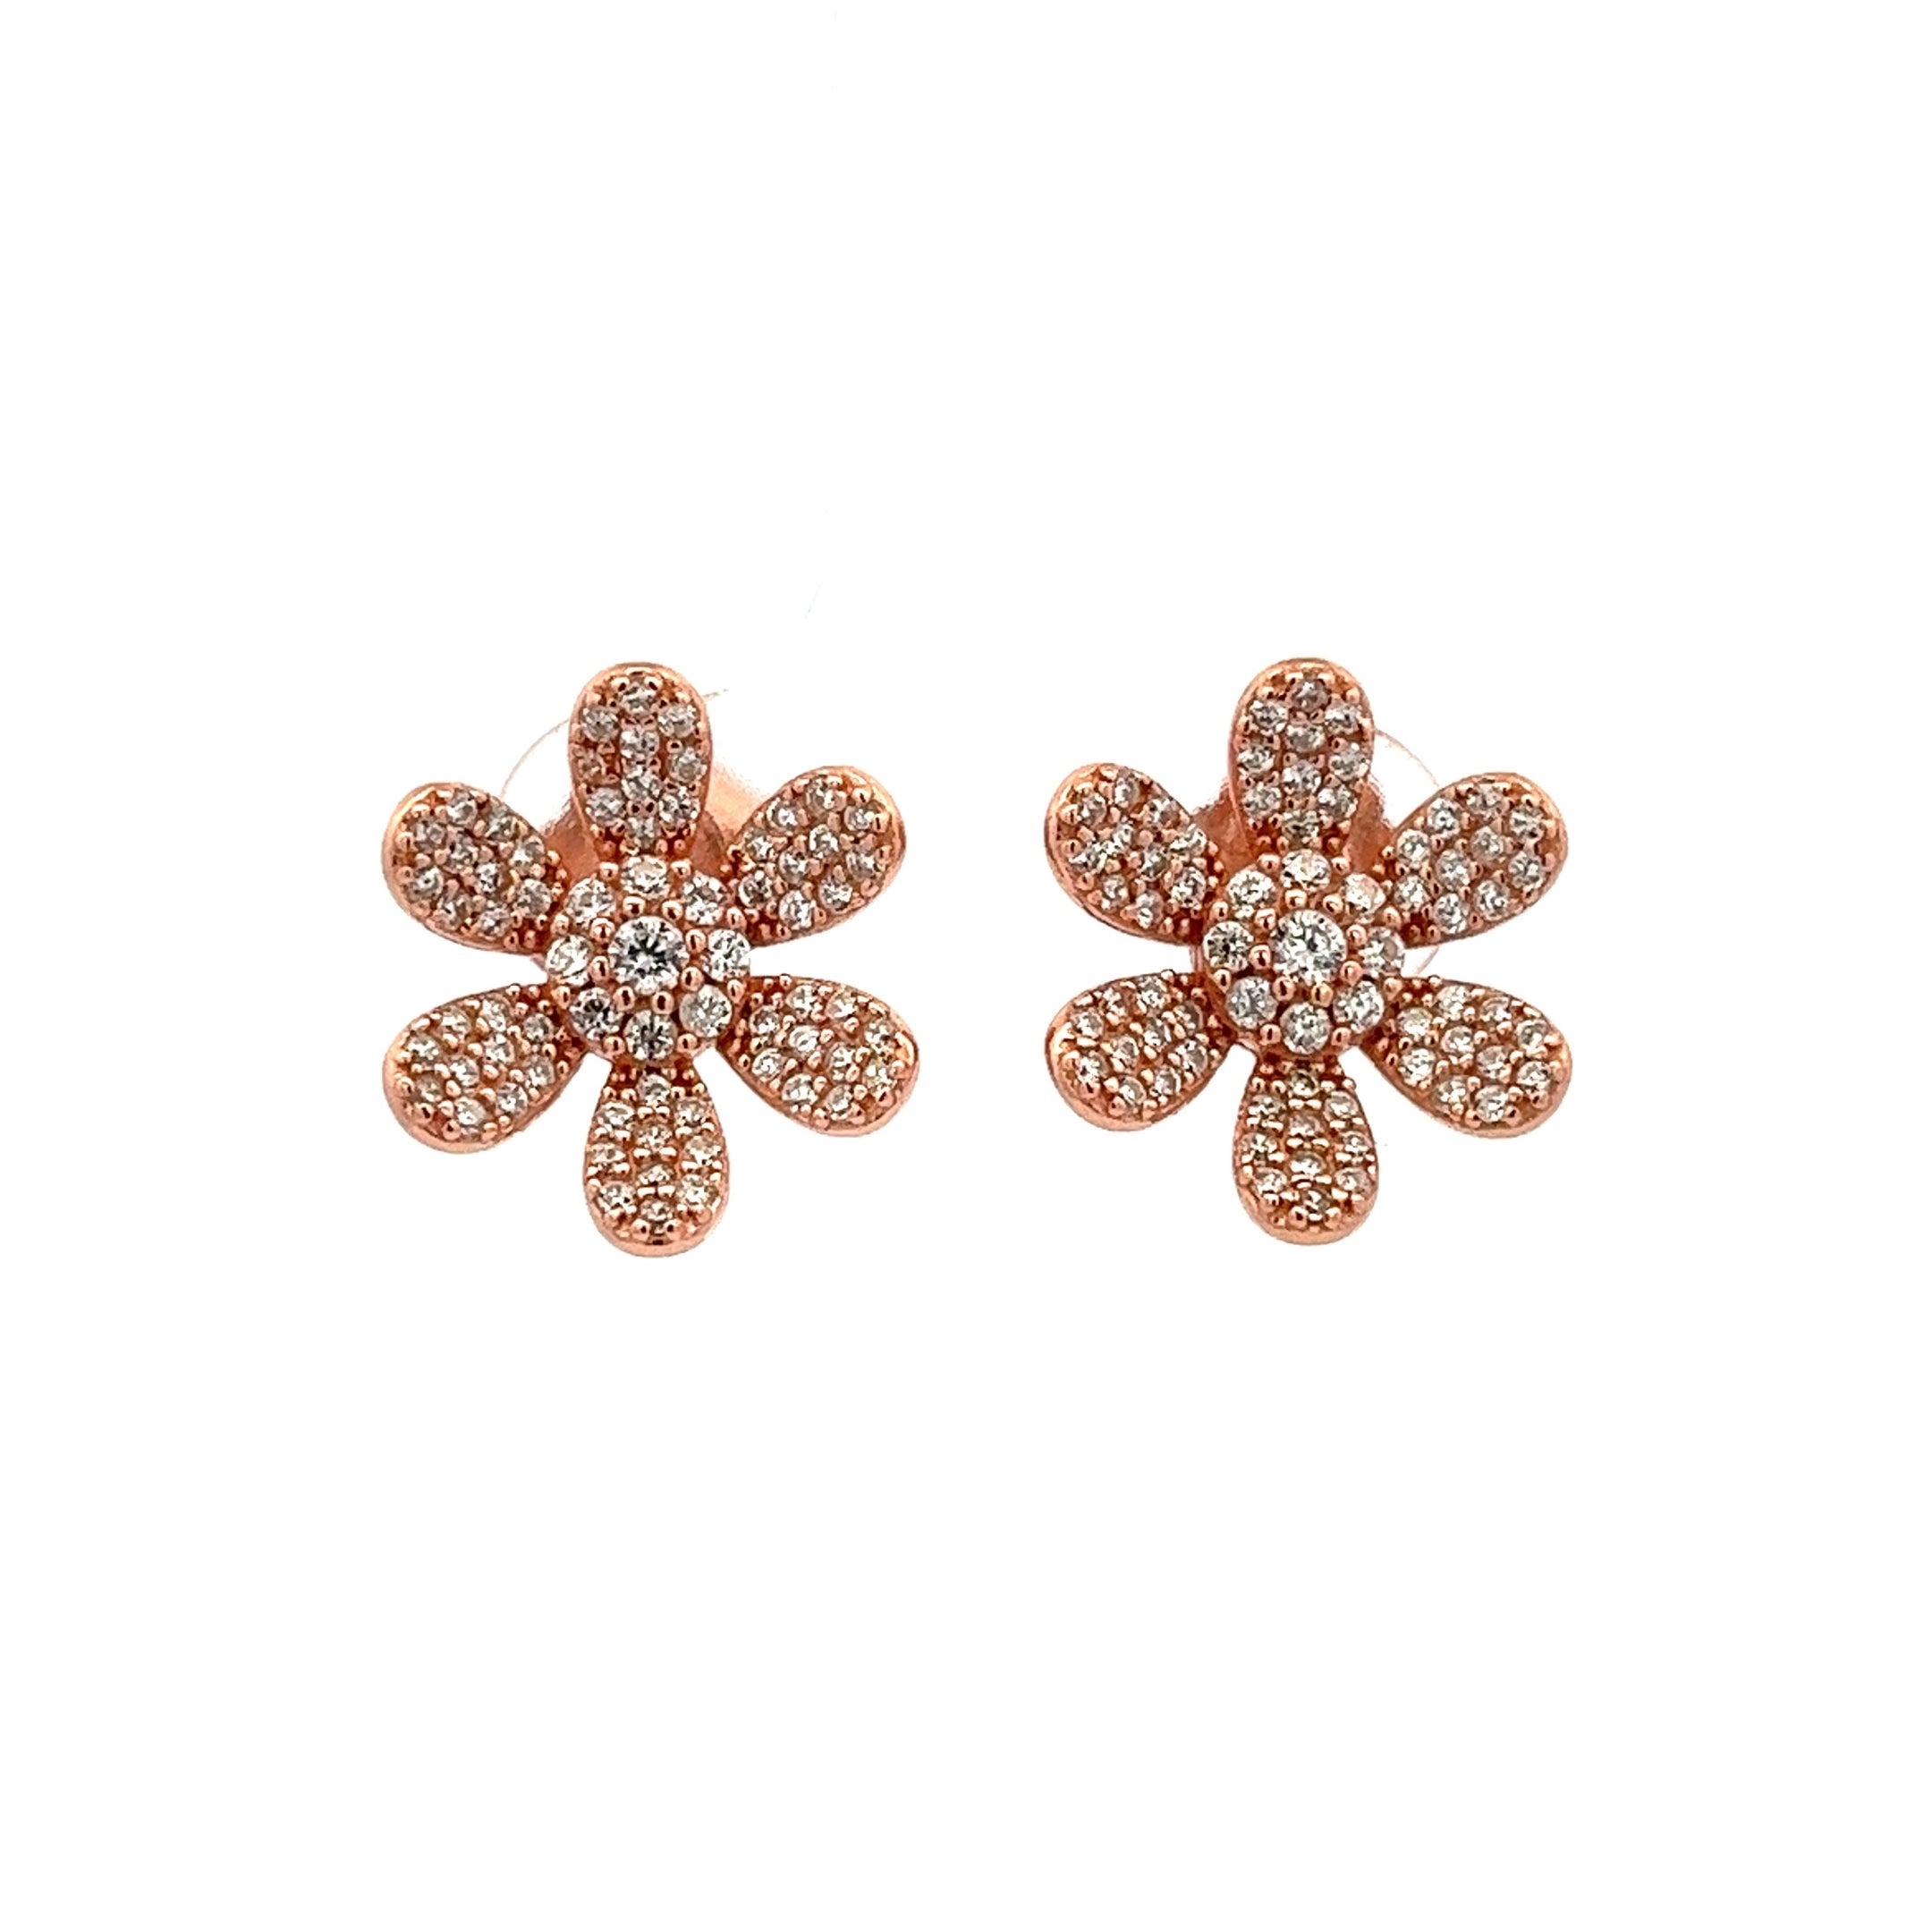 925 ROSE GOLD PLATED FLOWER STUD EARRINGS WITH CRYSTALS